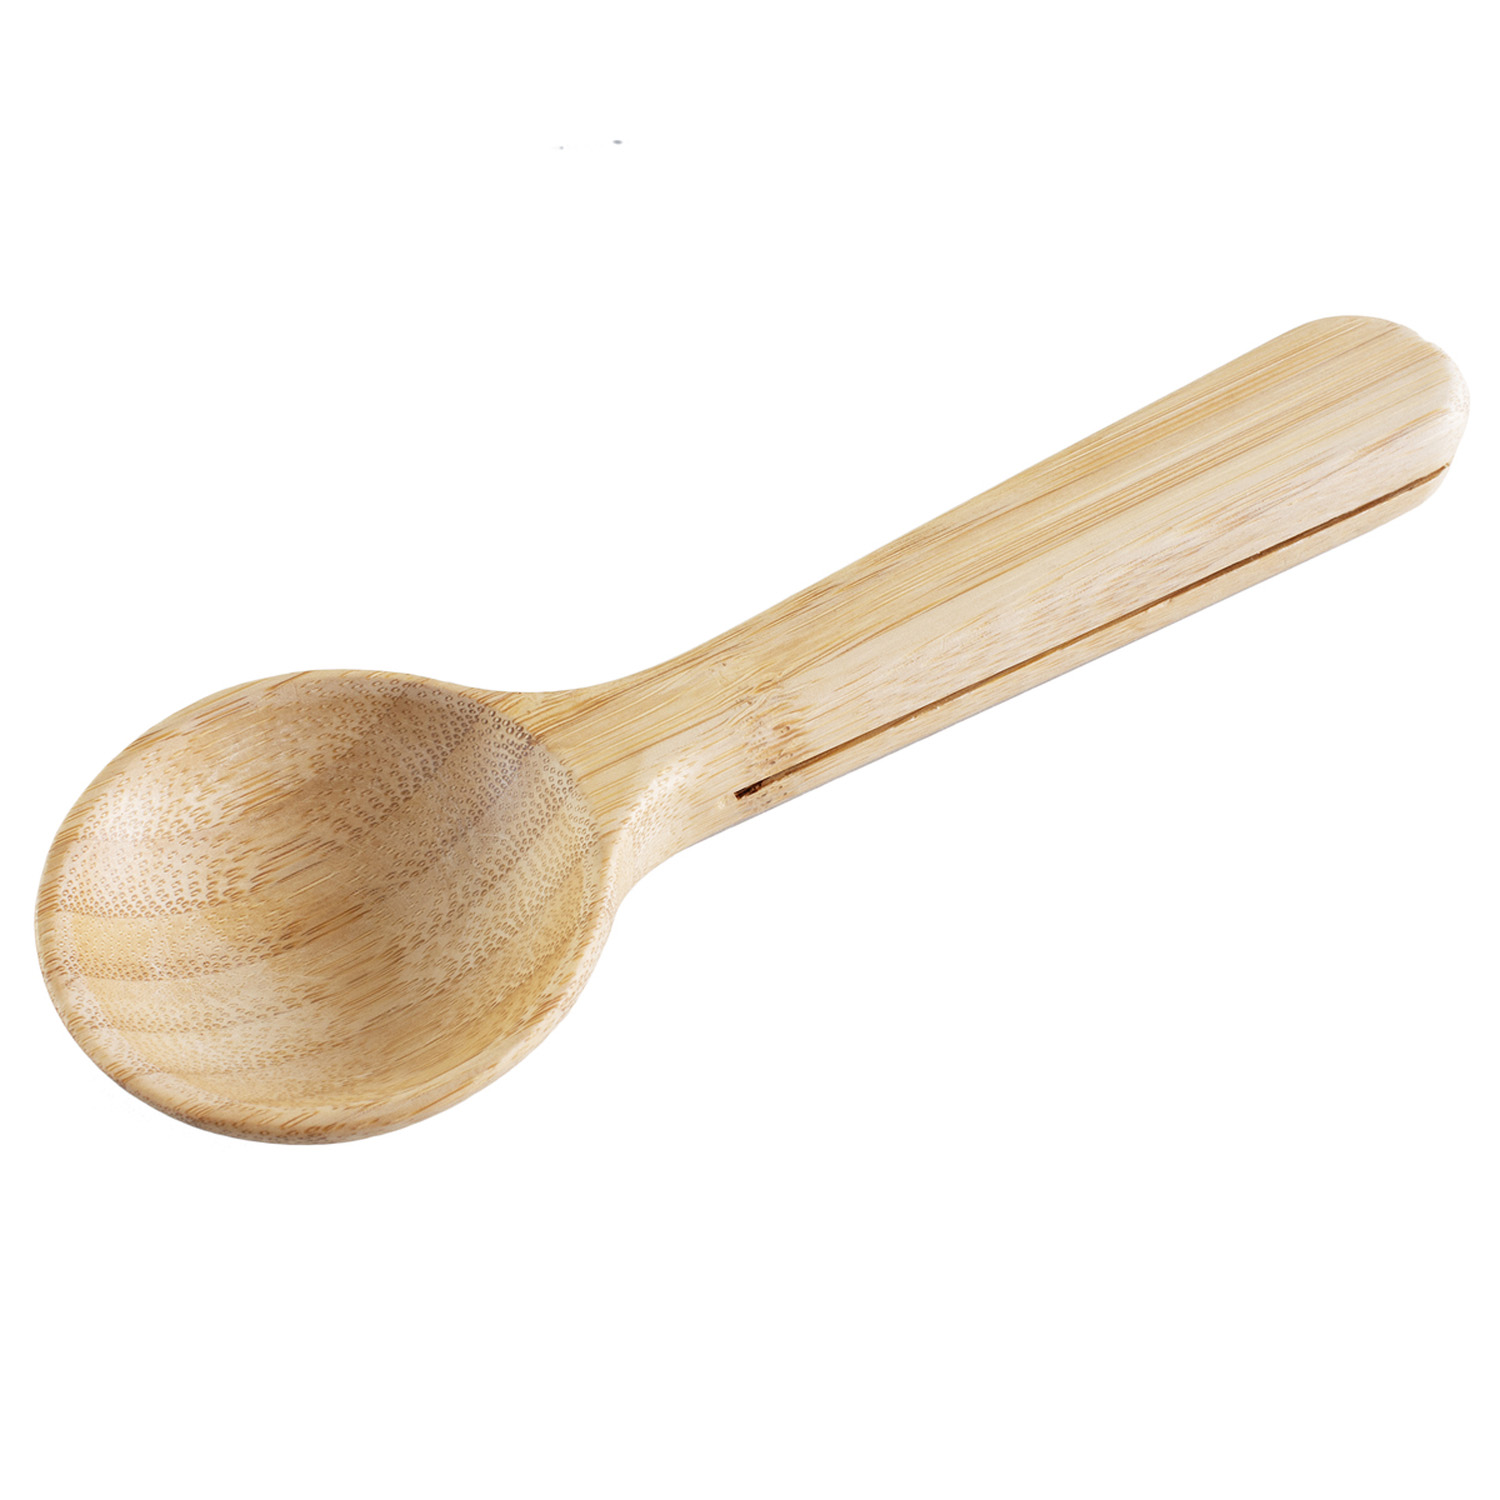 Bamboo Coffee Scoop with Bag Clip 